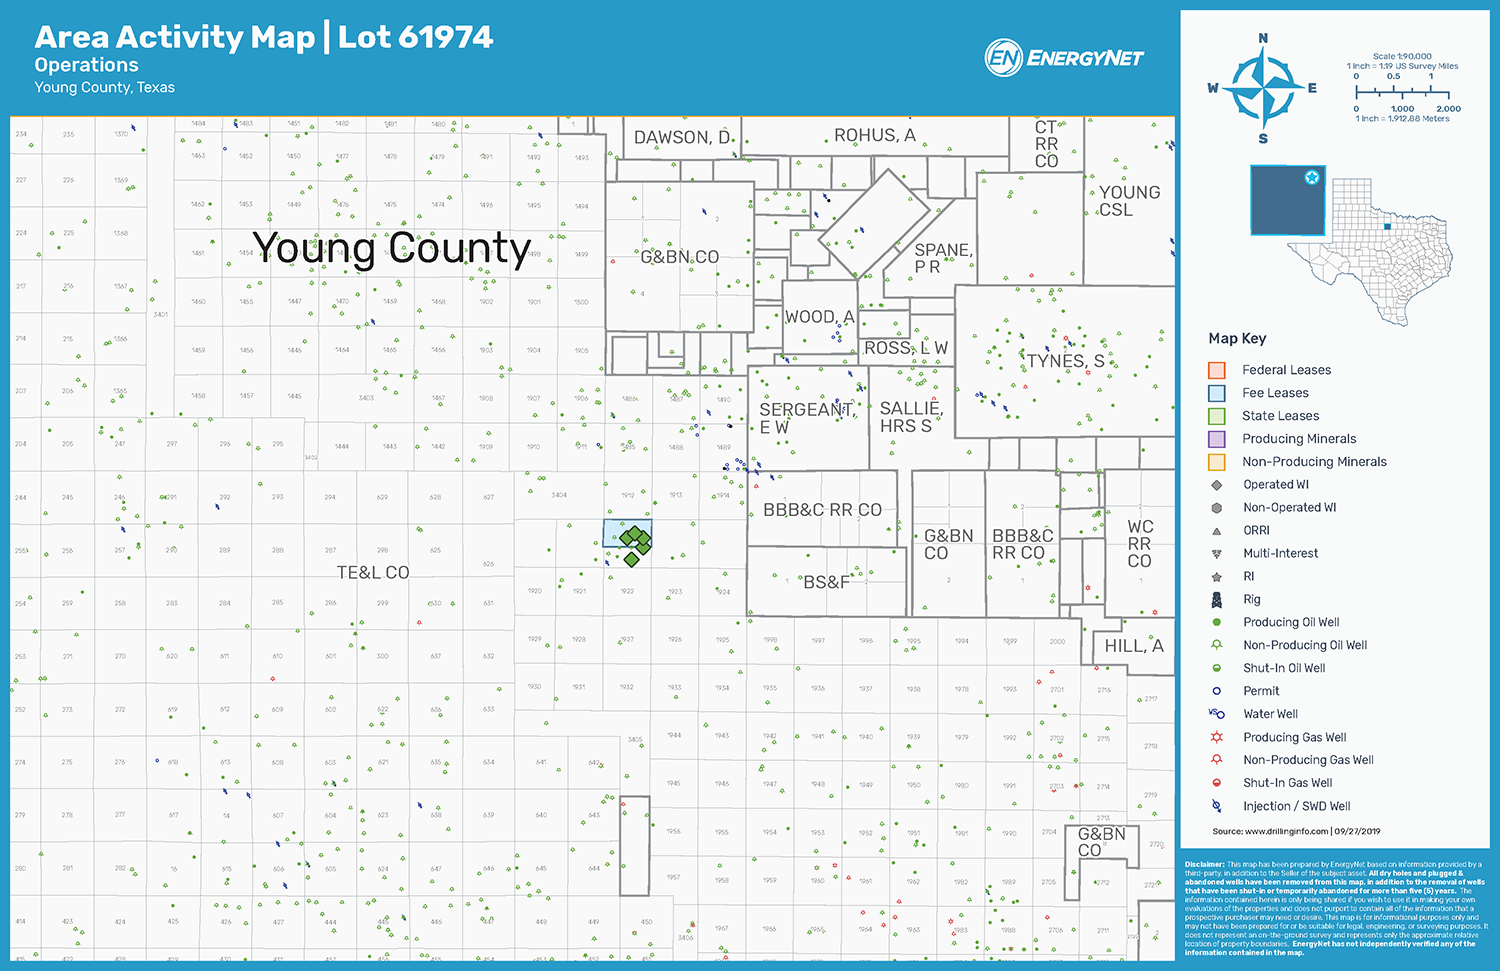 Borderline Operating North Texas Operated Asset Map, Young County (Source: EnergyNet)